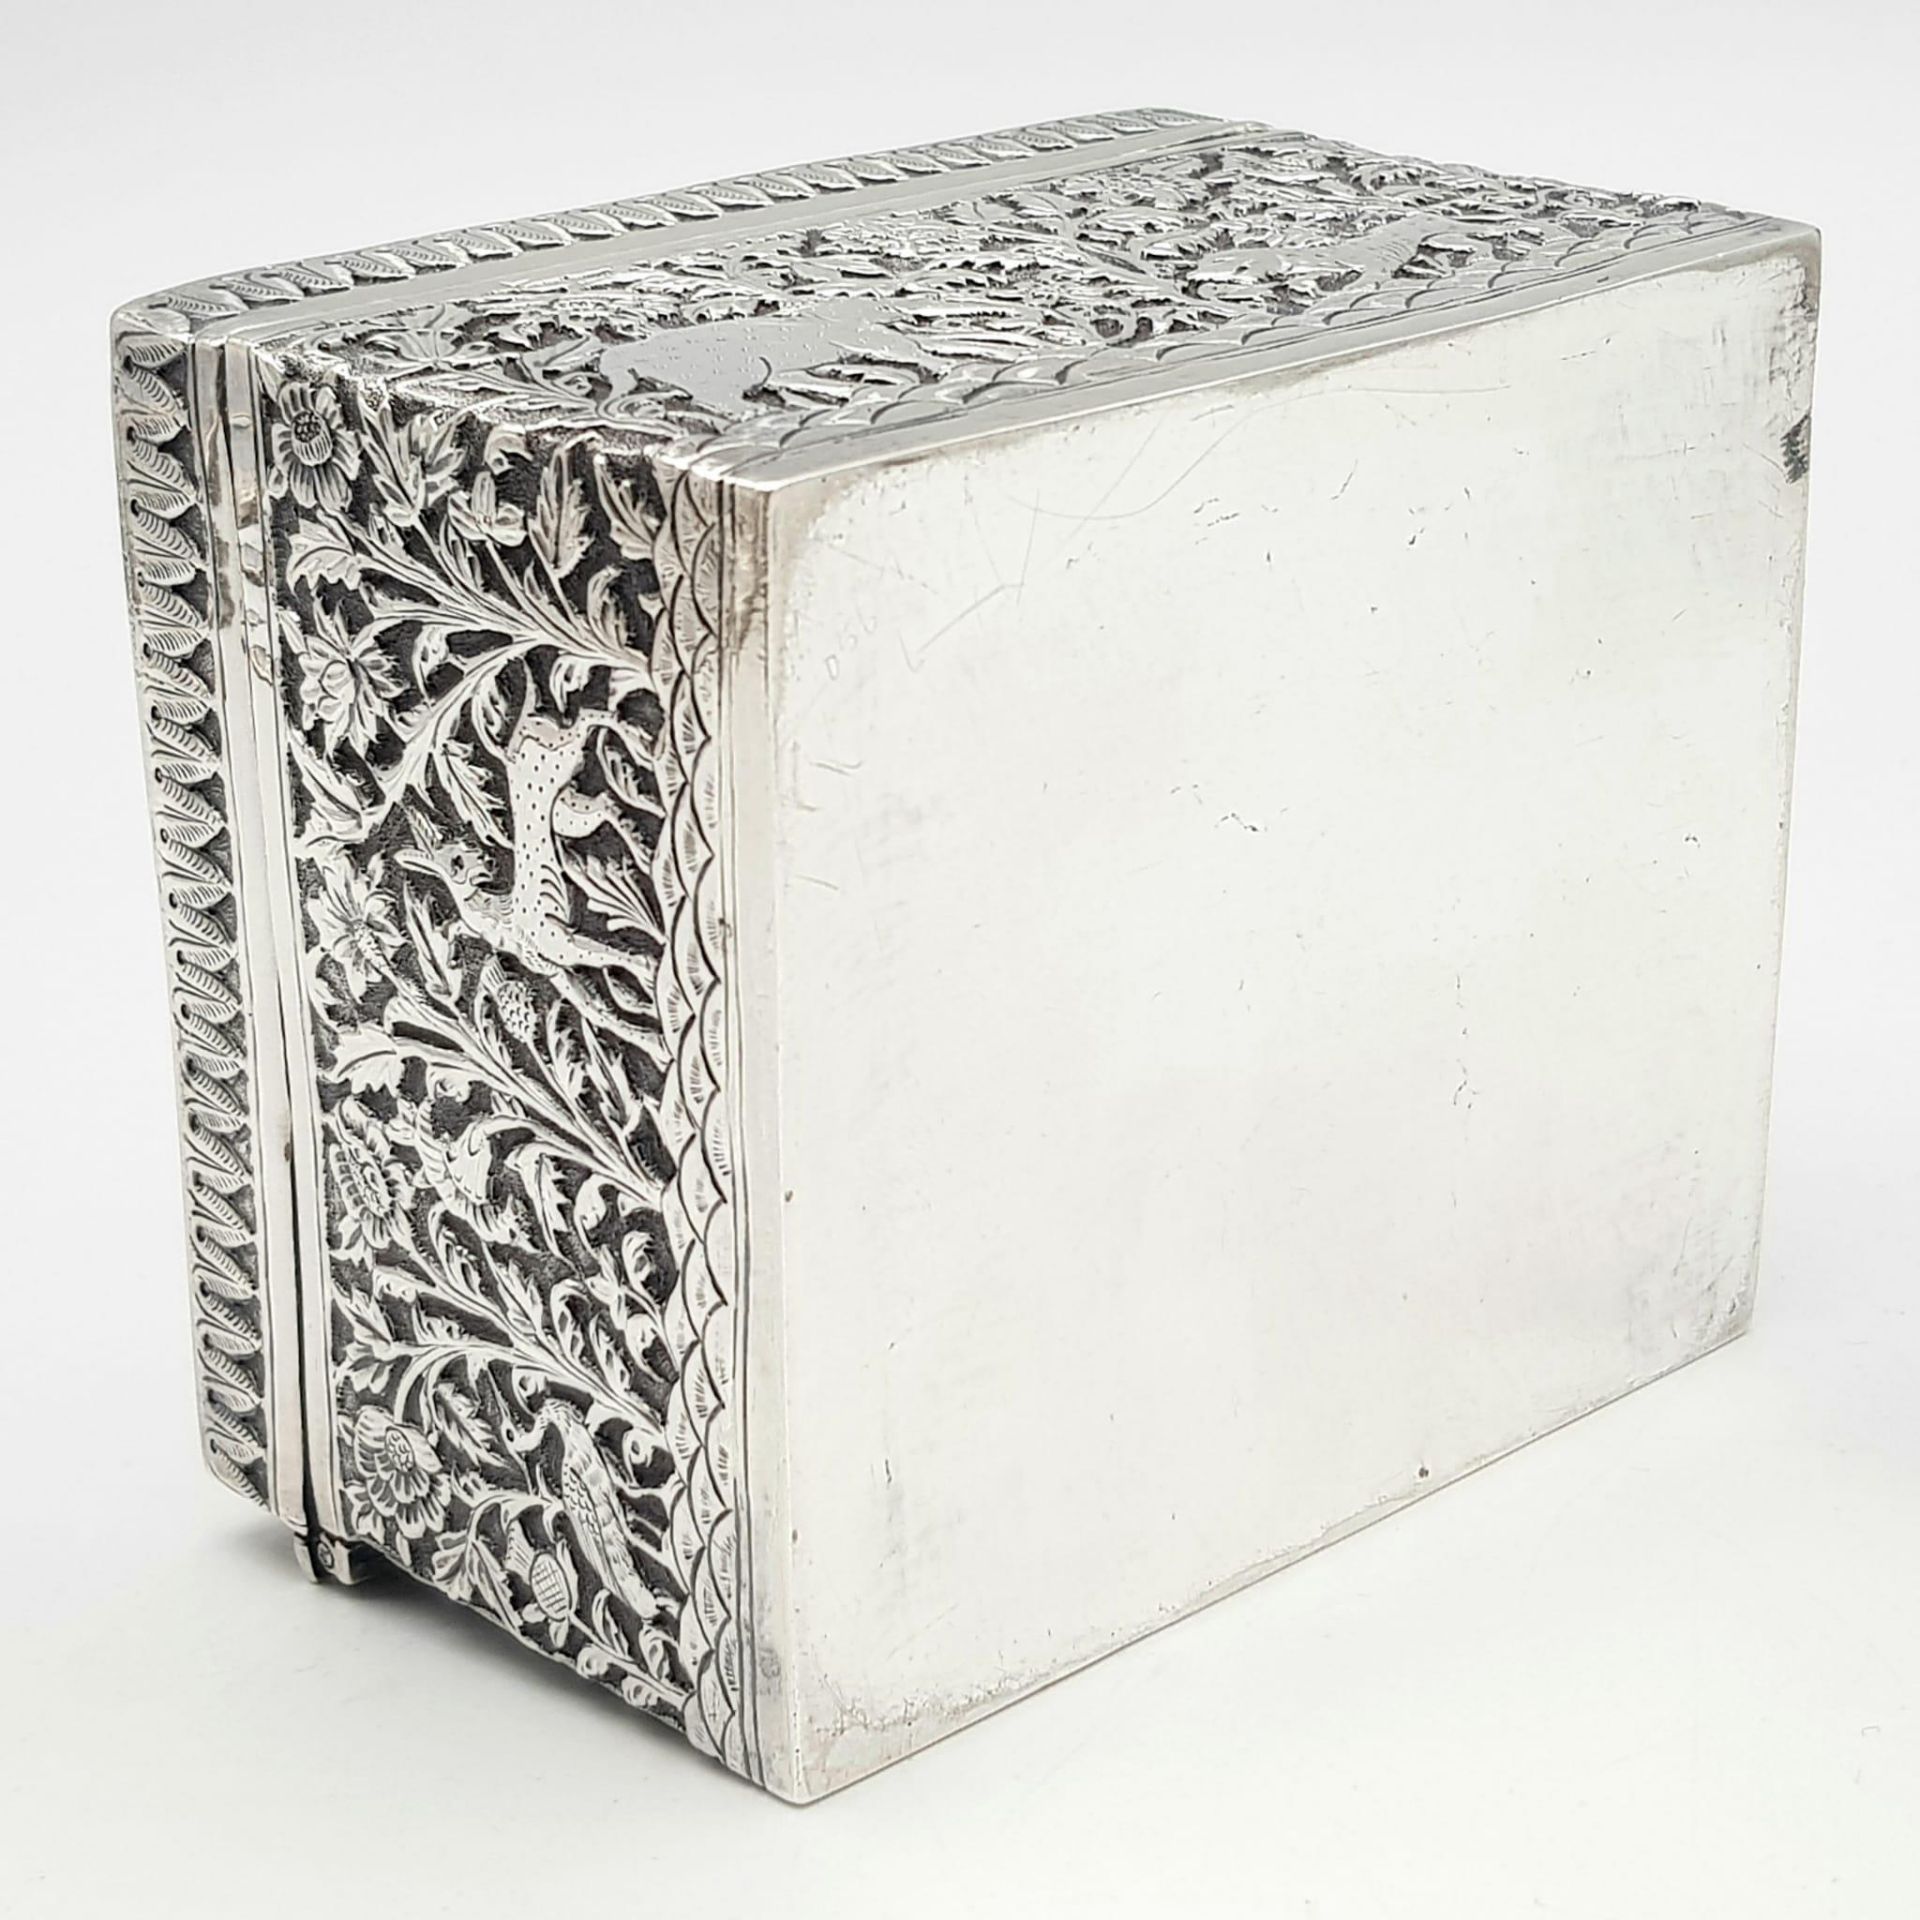 A SOLID SILVER HINGED TRINKET BOX HAND ENGRAVED WITH AN AFRICAN THEME, IN VERY GOOD CONDITION AND - Image 15 of 15